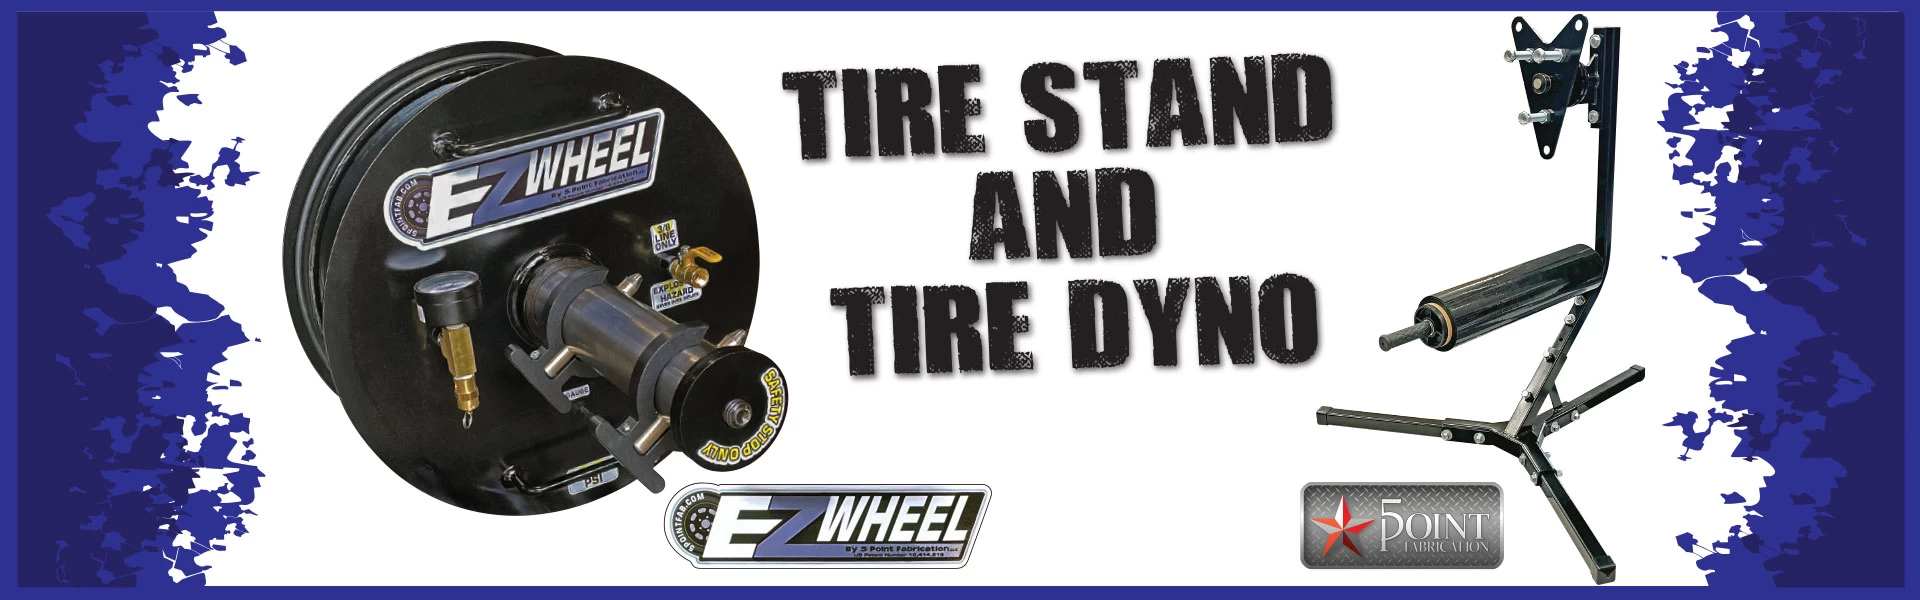 EZ Wheel Tire Dyno and EZ Tire Prep Stand from 5 Point Fabrication available at Day Motor Sports.